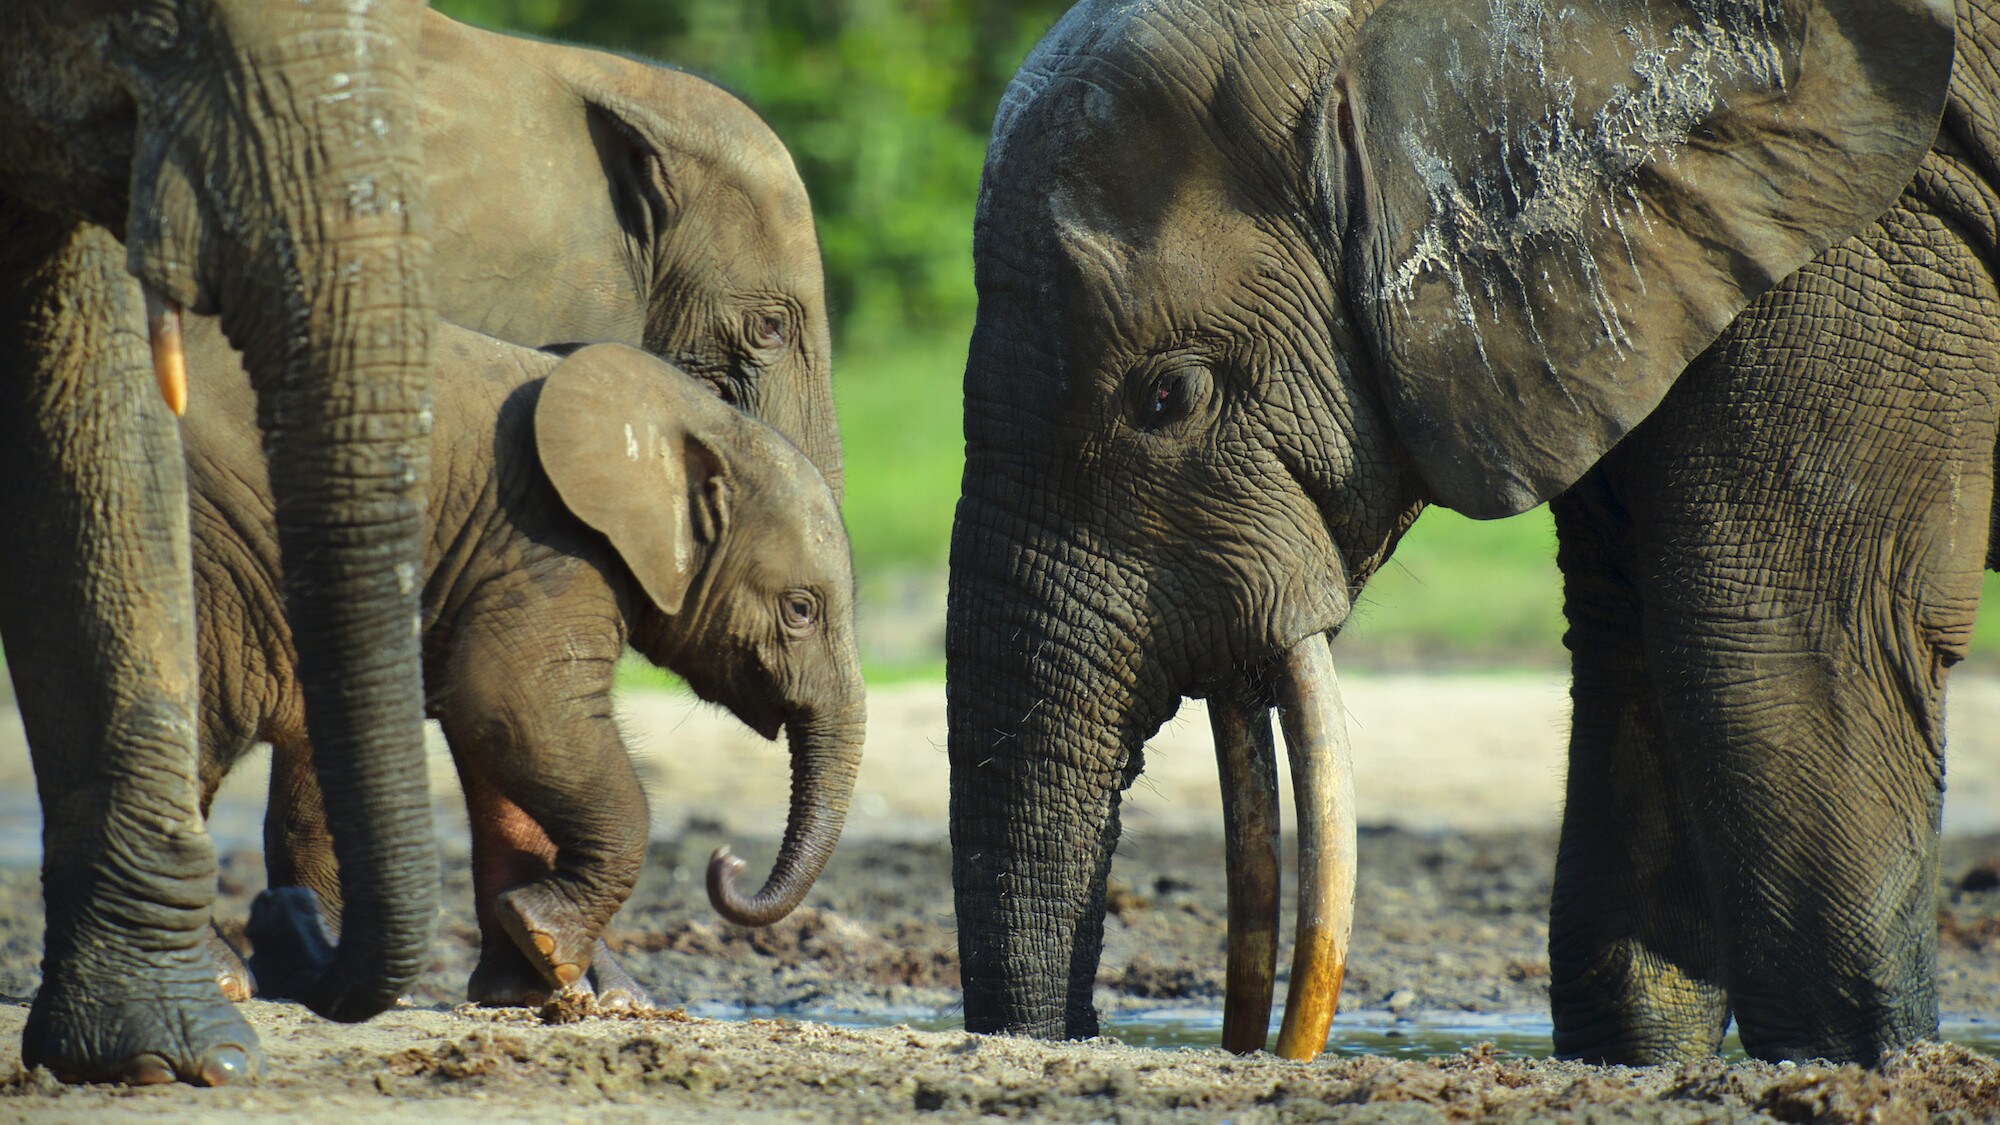 Elephants drinking, Male, female and babies. (National Geographic for Disney+/Bertie Gregory)